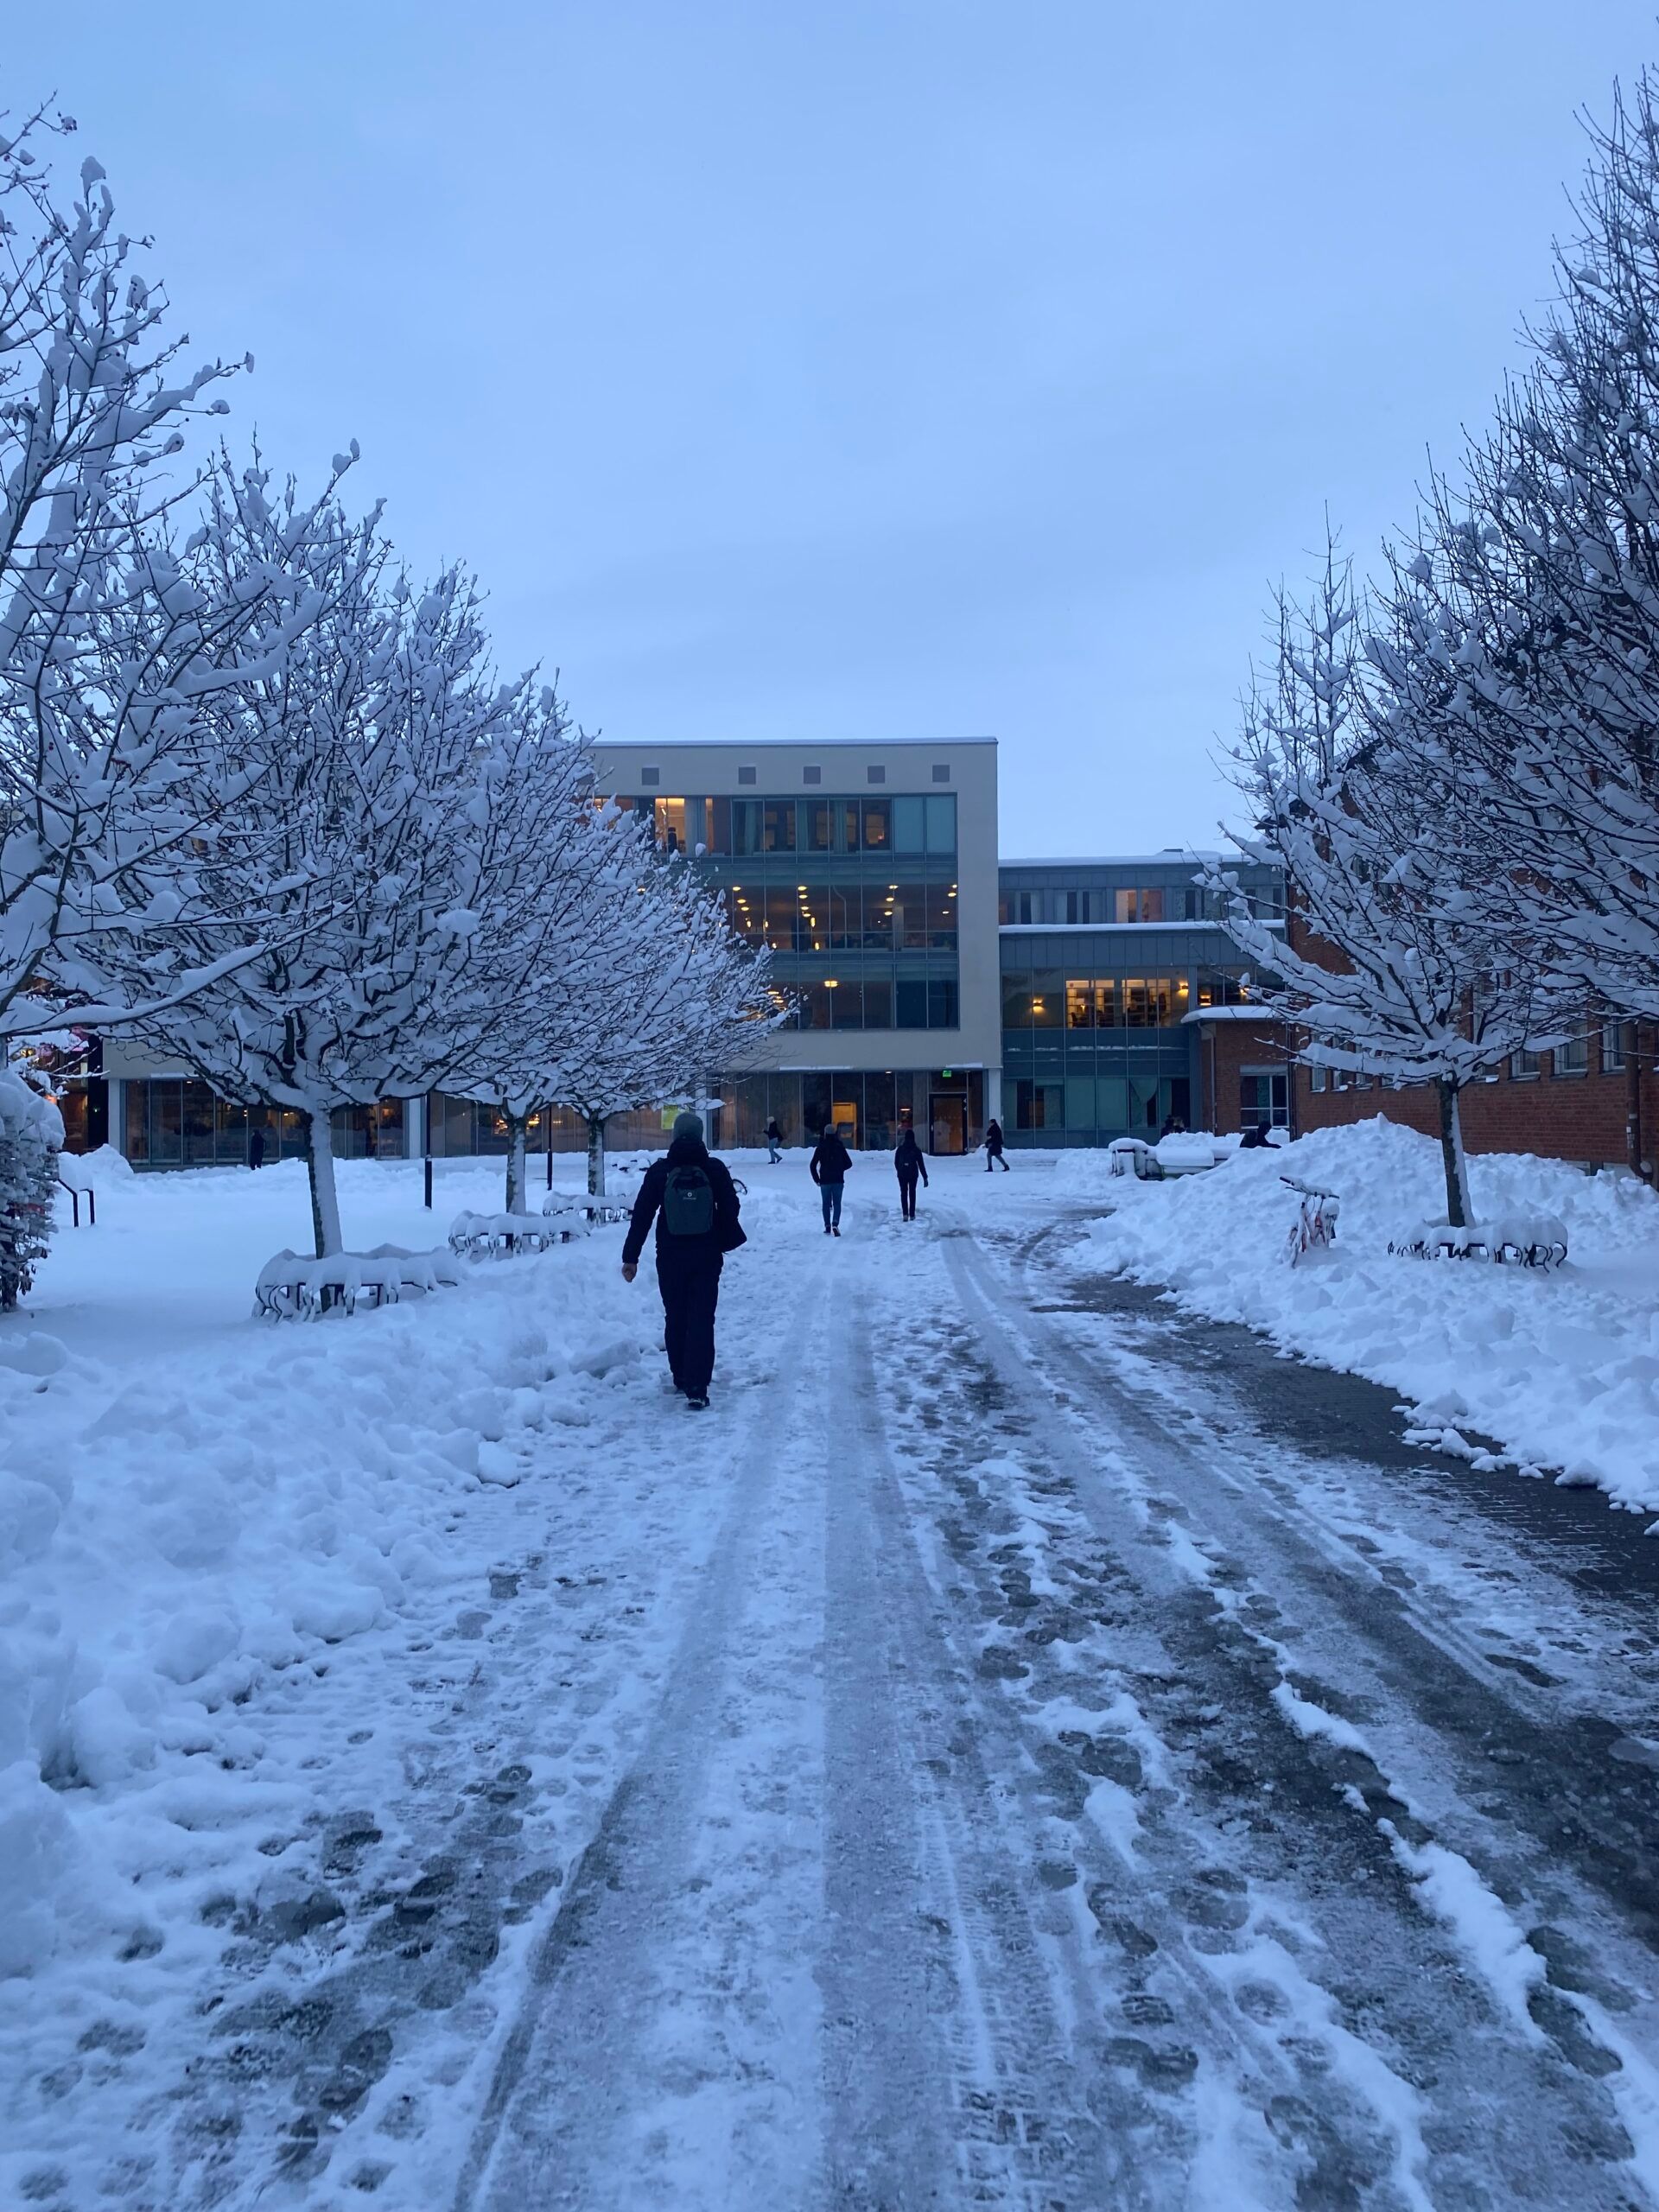 A view of University West during winter